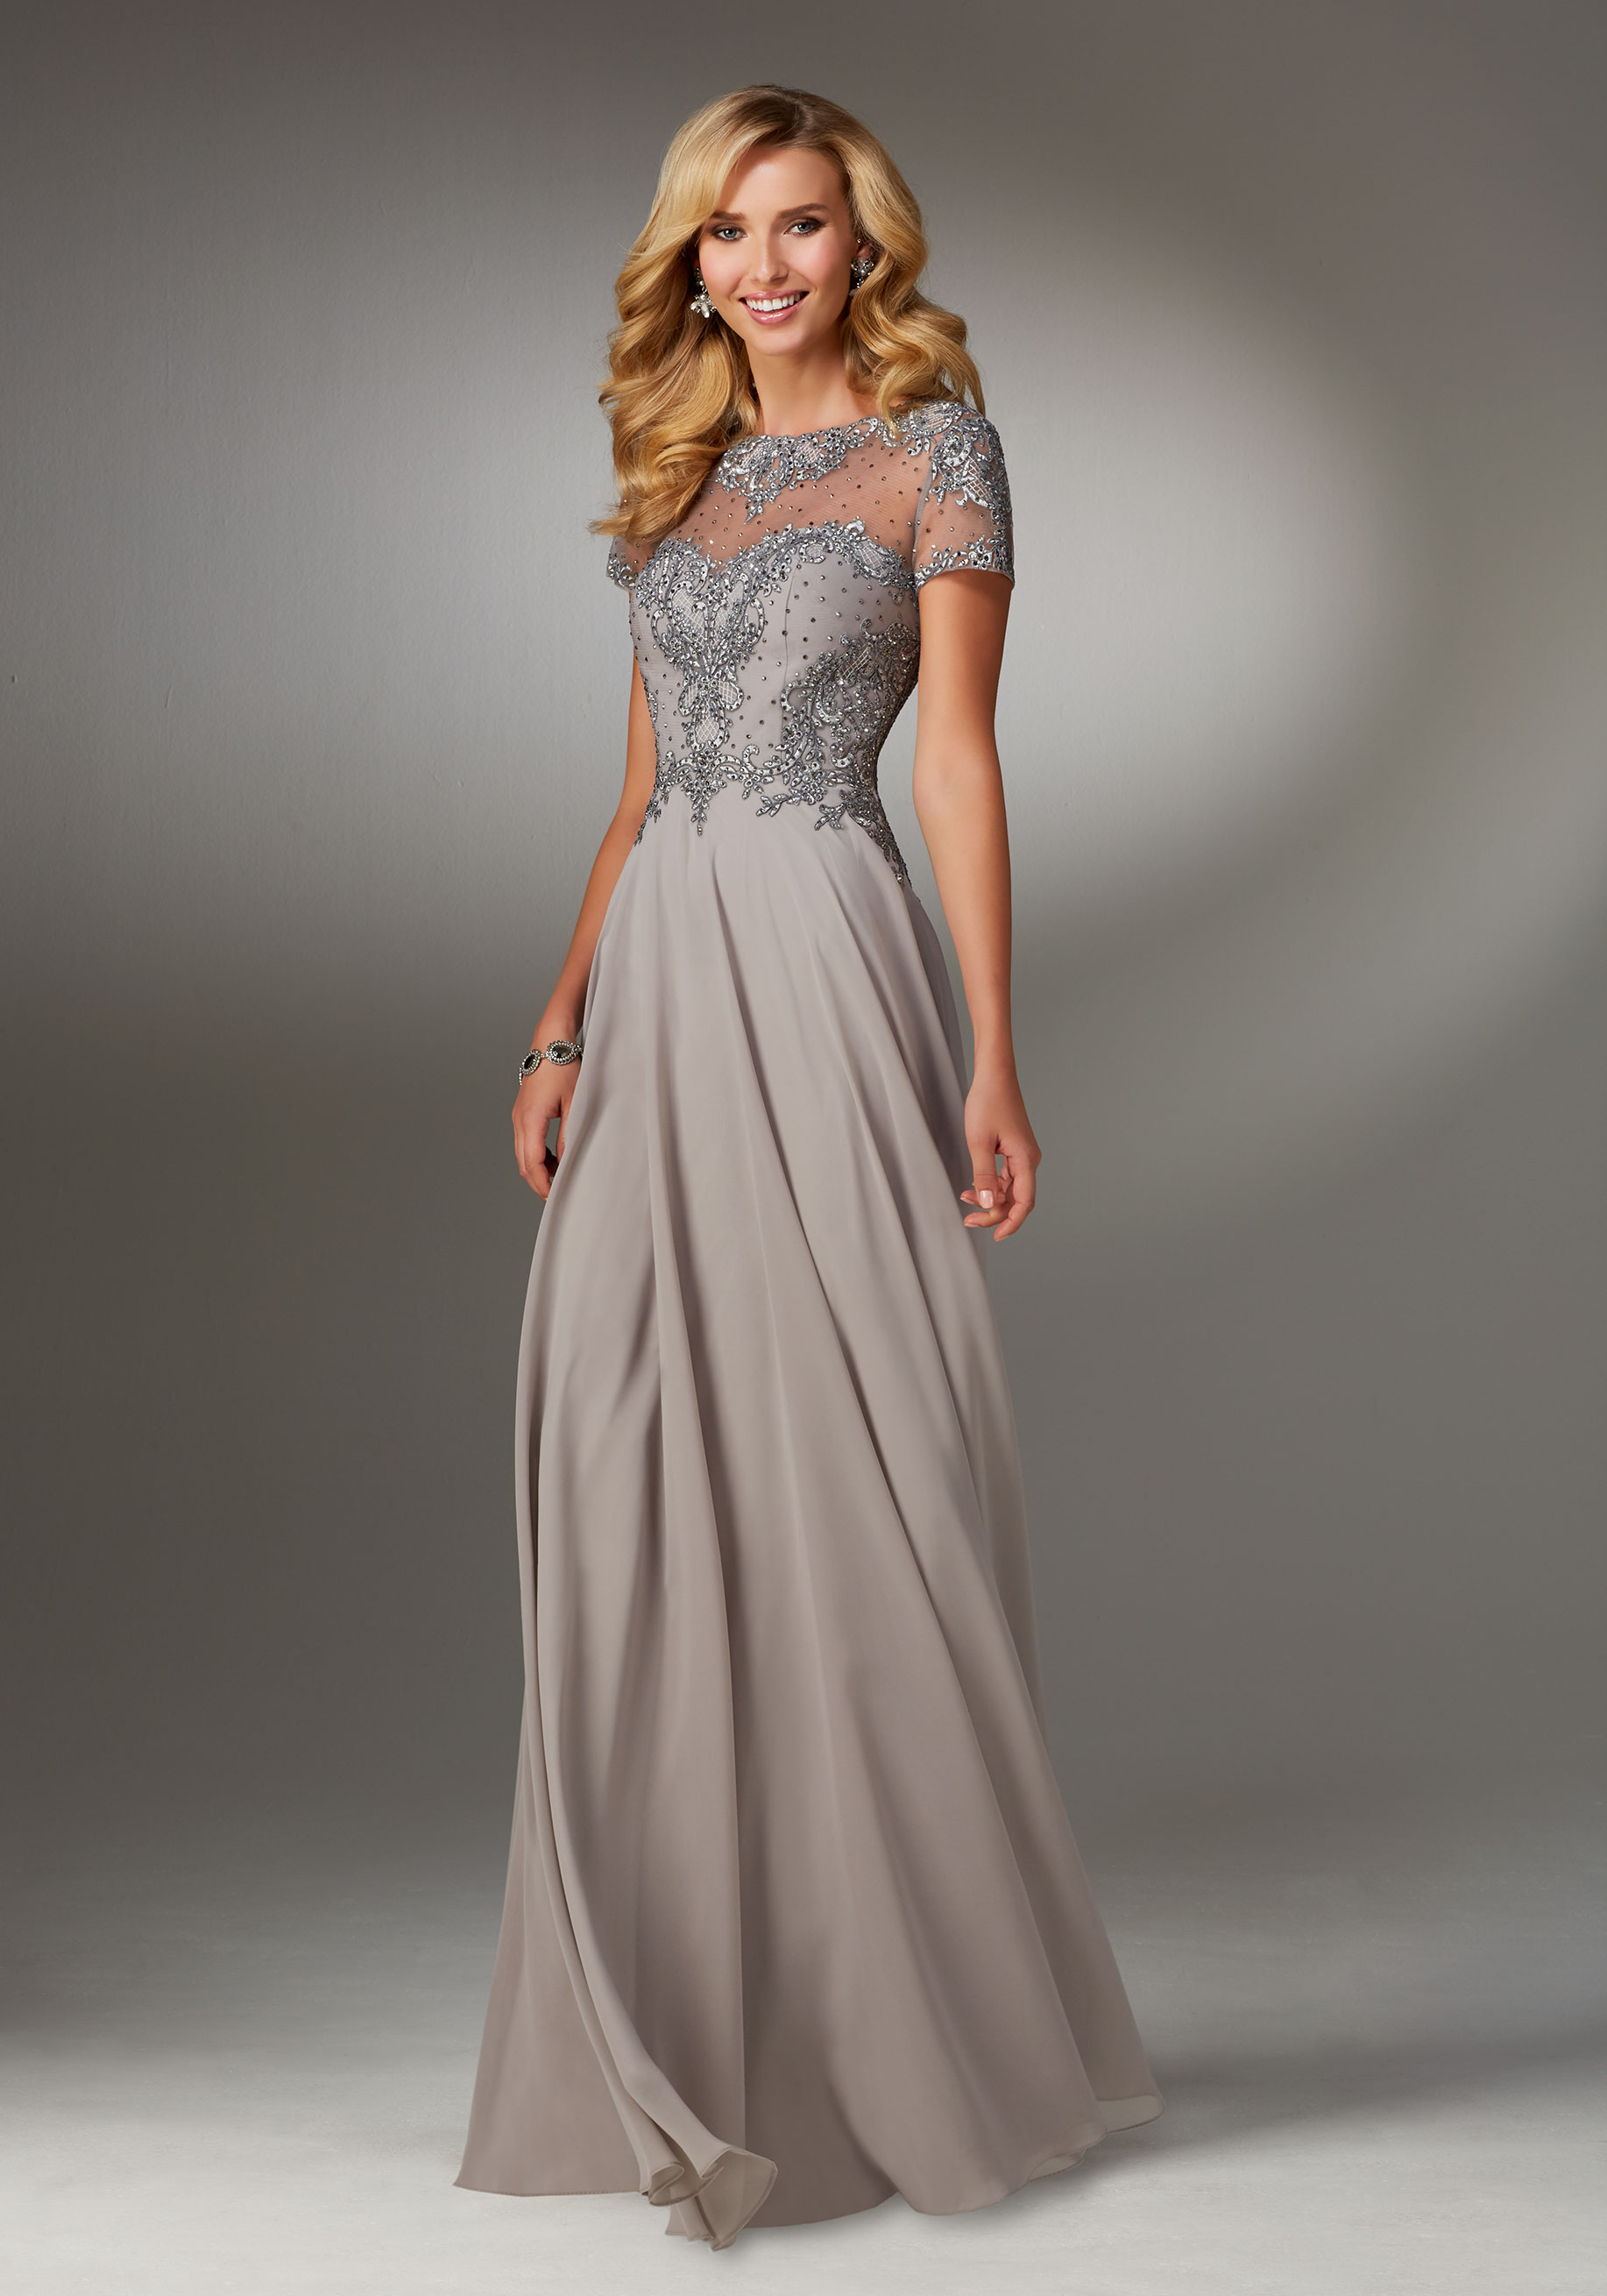 Pewter Dresses special Occasions